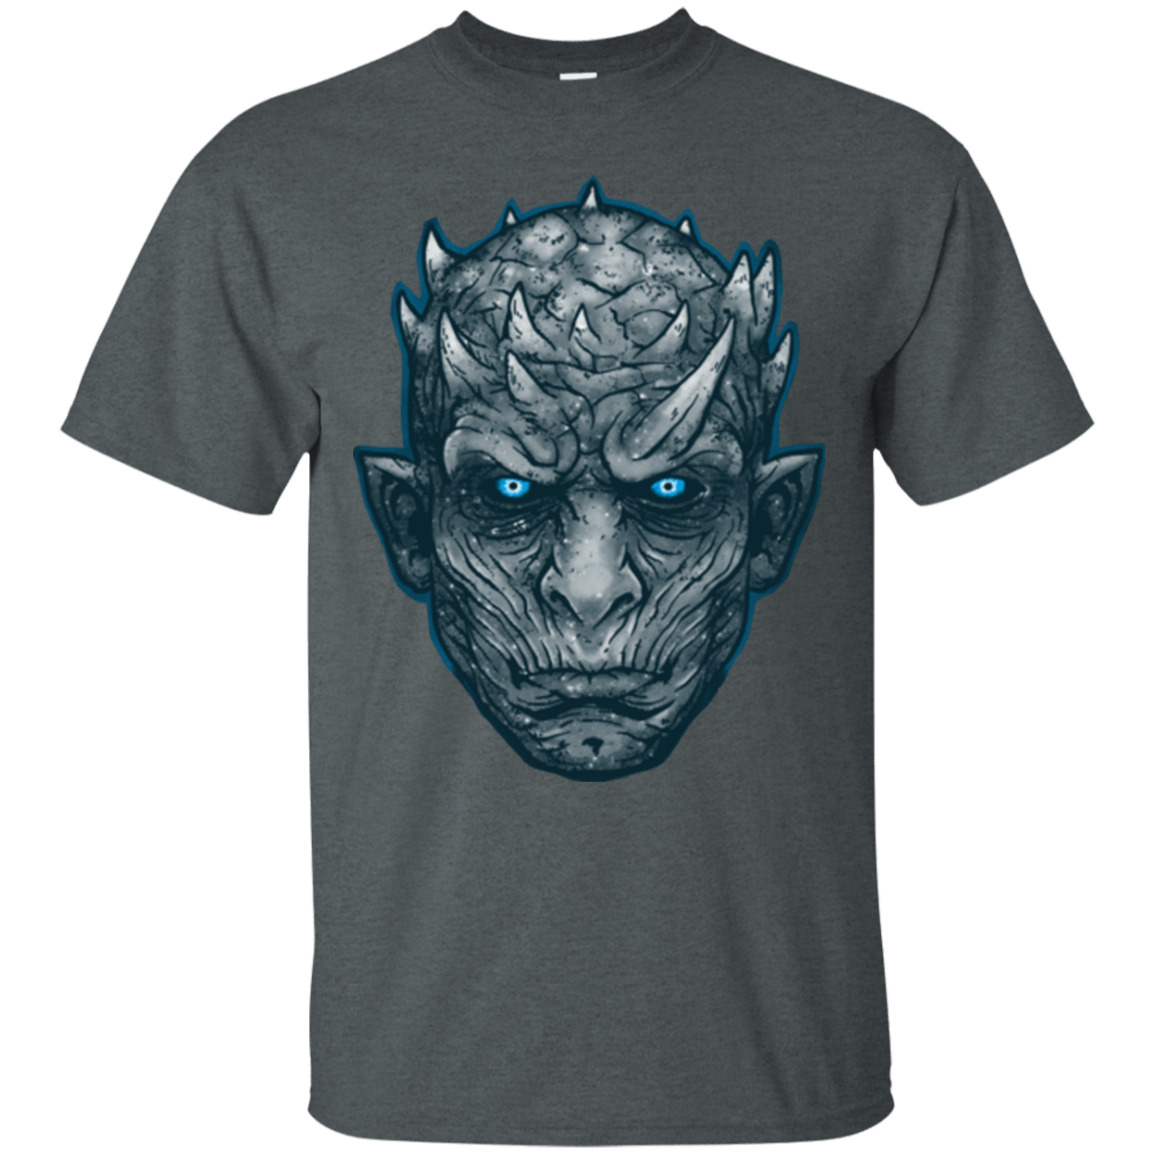 T-Shirts Dark Heather / Small The Other King2 T-Shirt